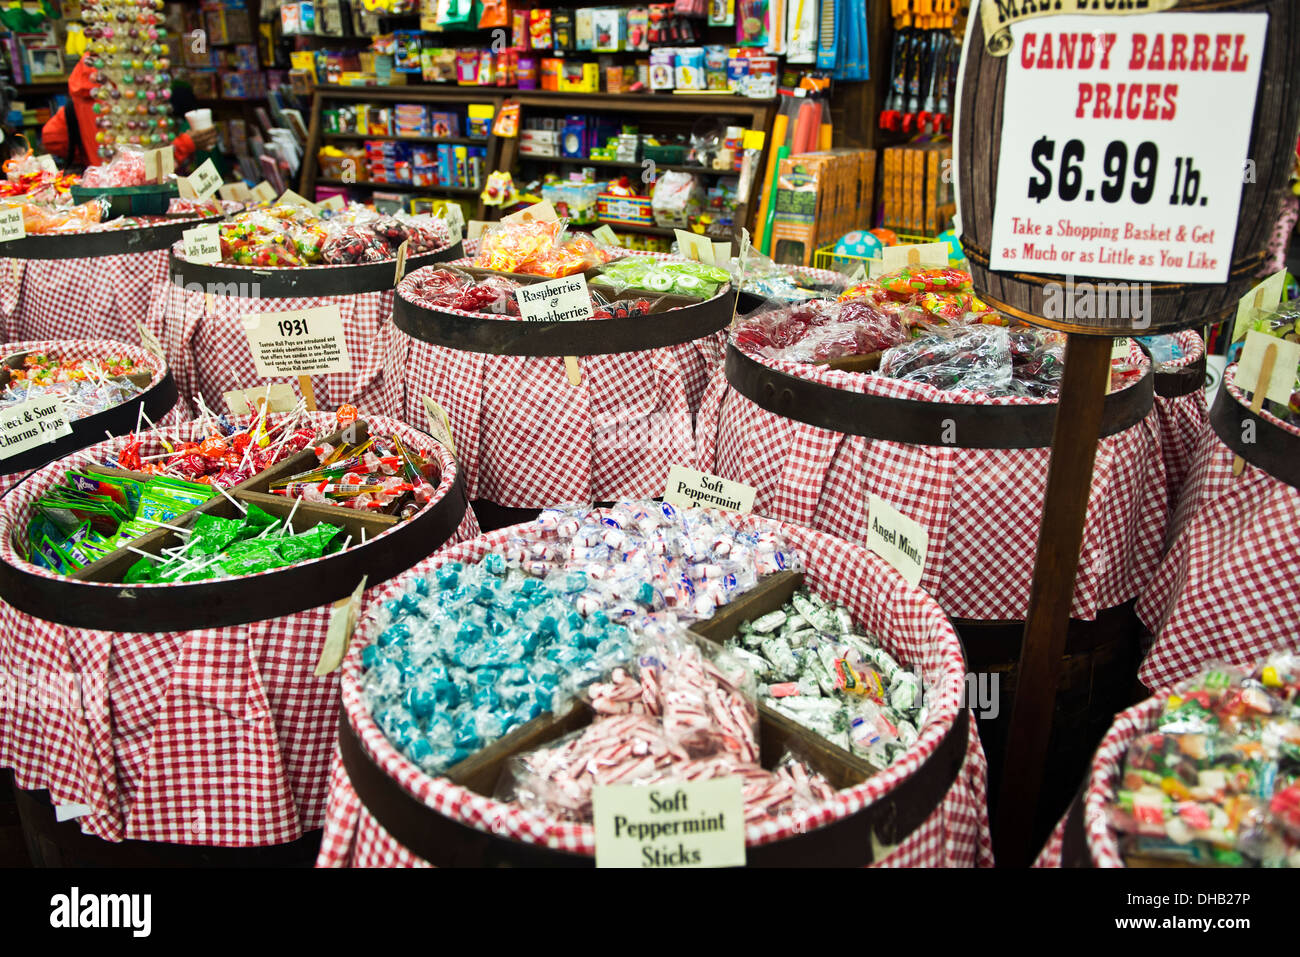 Candy Barrels Stock Photos Candy Barrels Stock Images Alamy